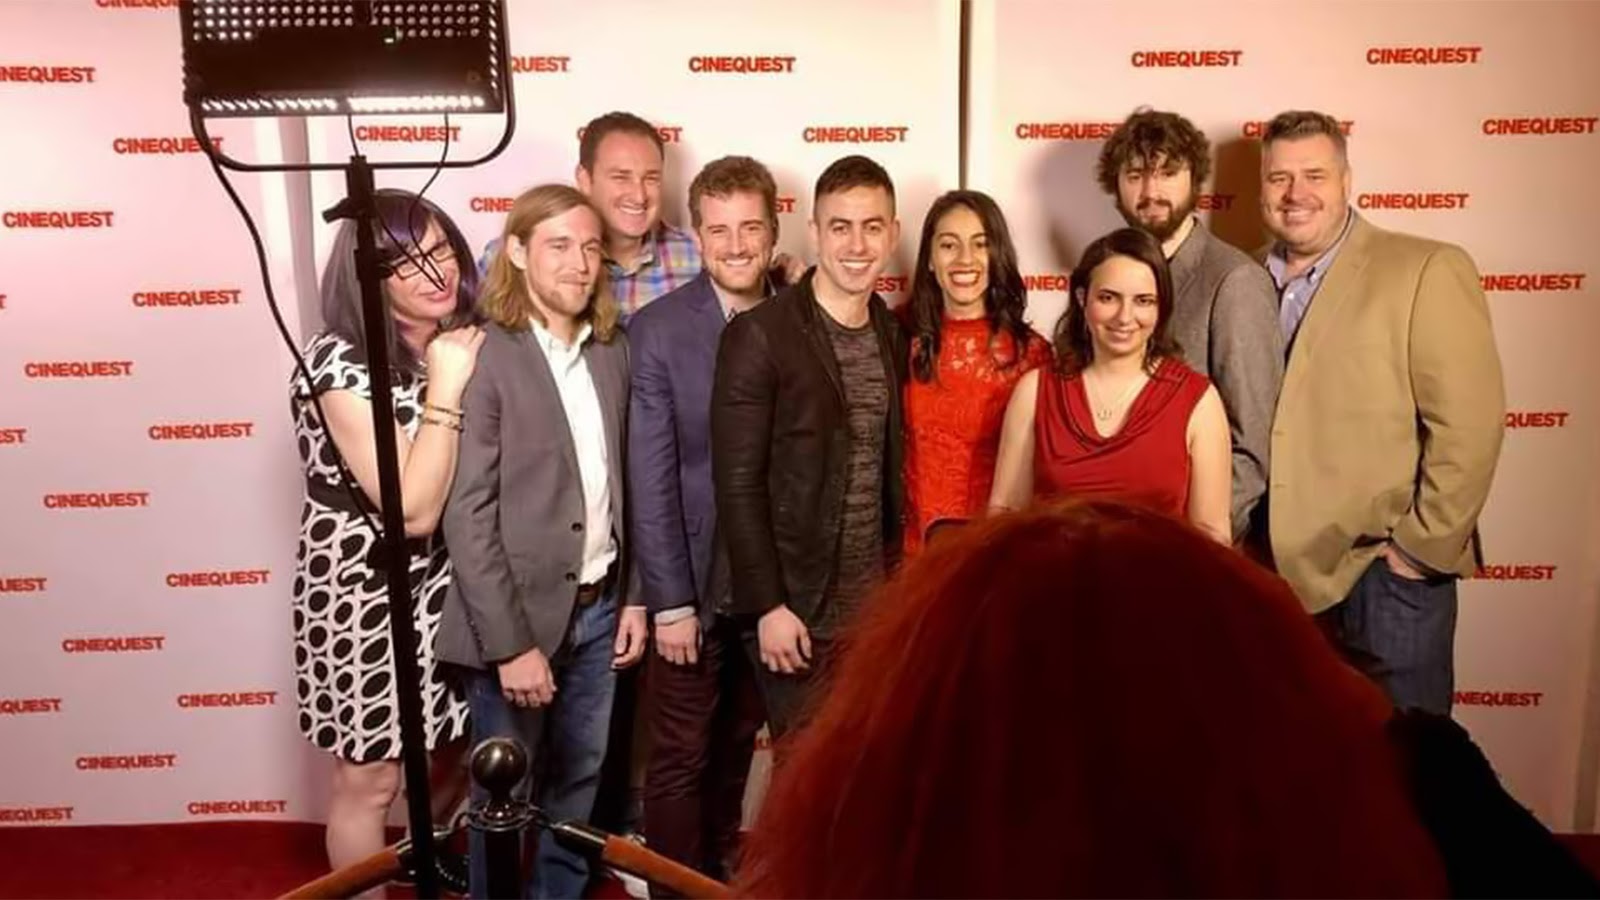 The LUPE crew at Cinequest 2019